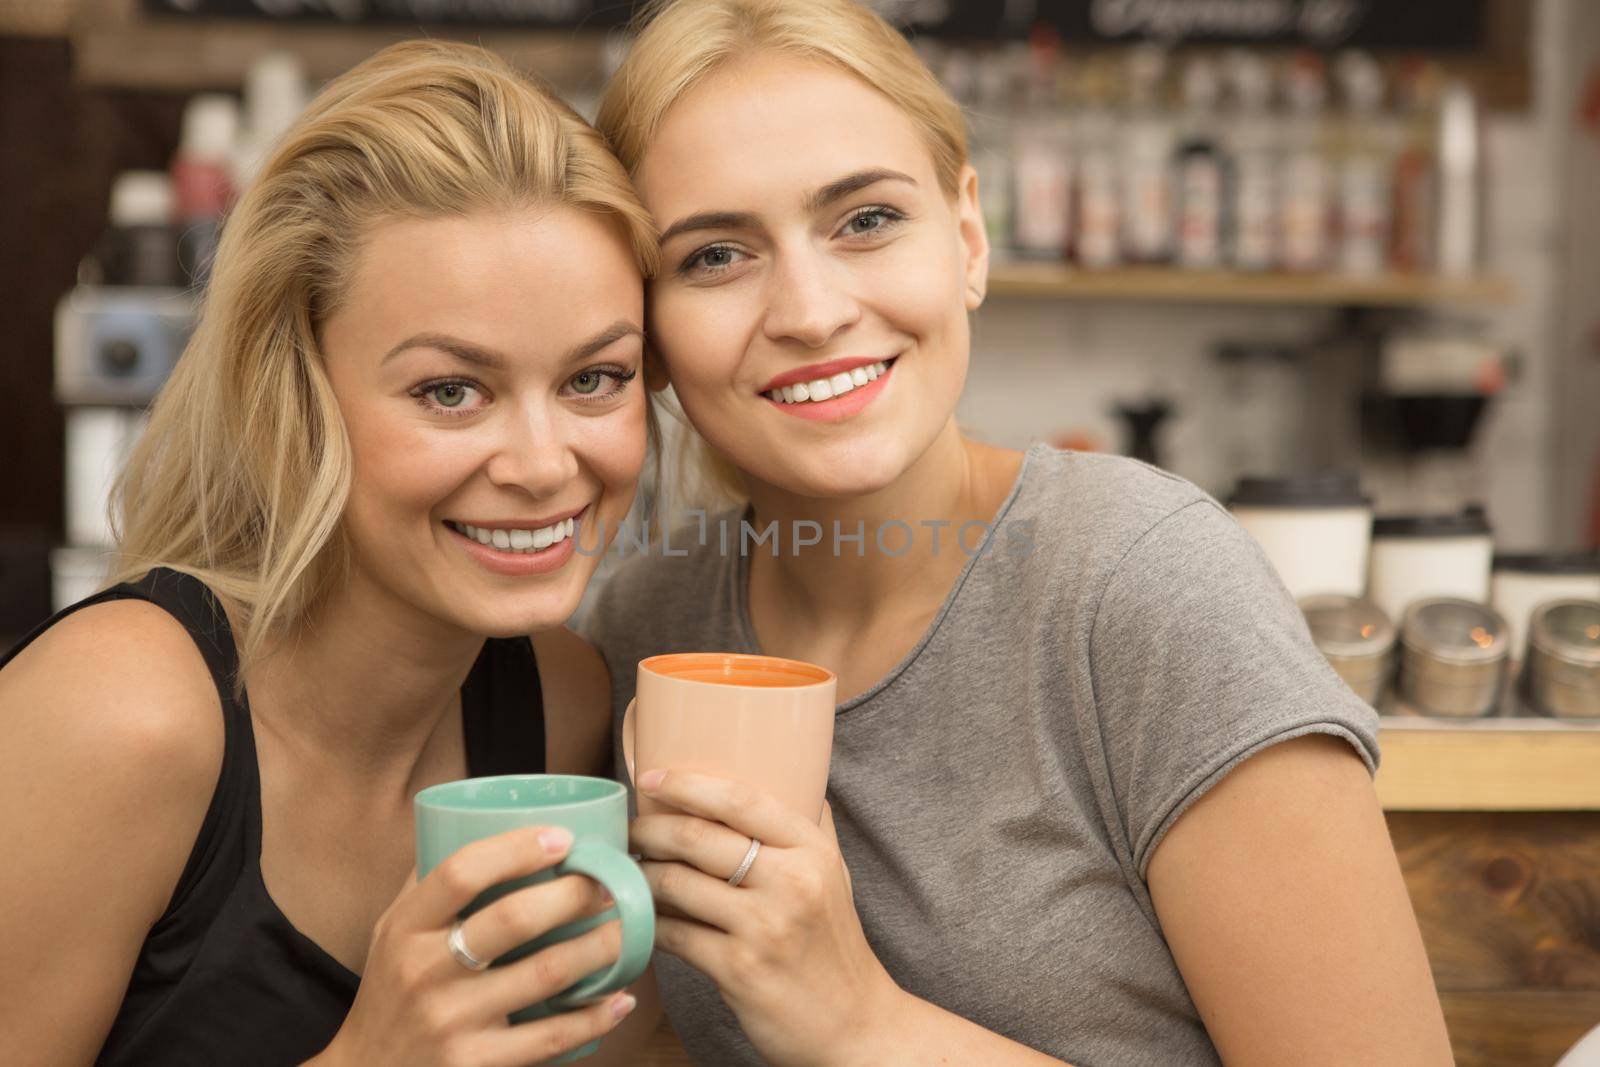 Gorgeous ypung girls smiling to the camera holding cups of coffee while relaxing together at the cafe friendship relationships students campus college women beauty expressive emotions people lifestyle weekend